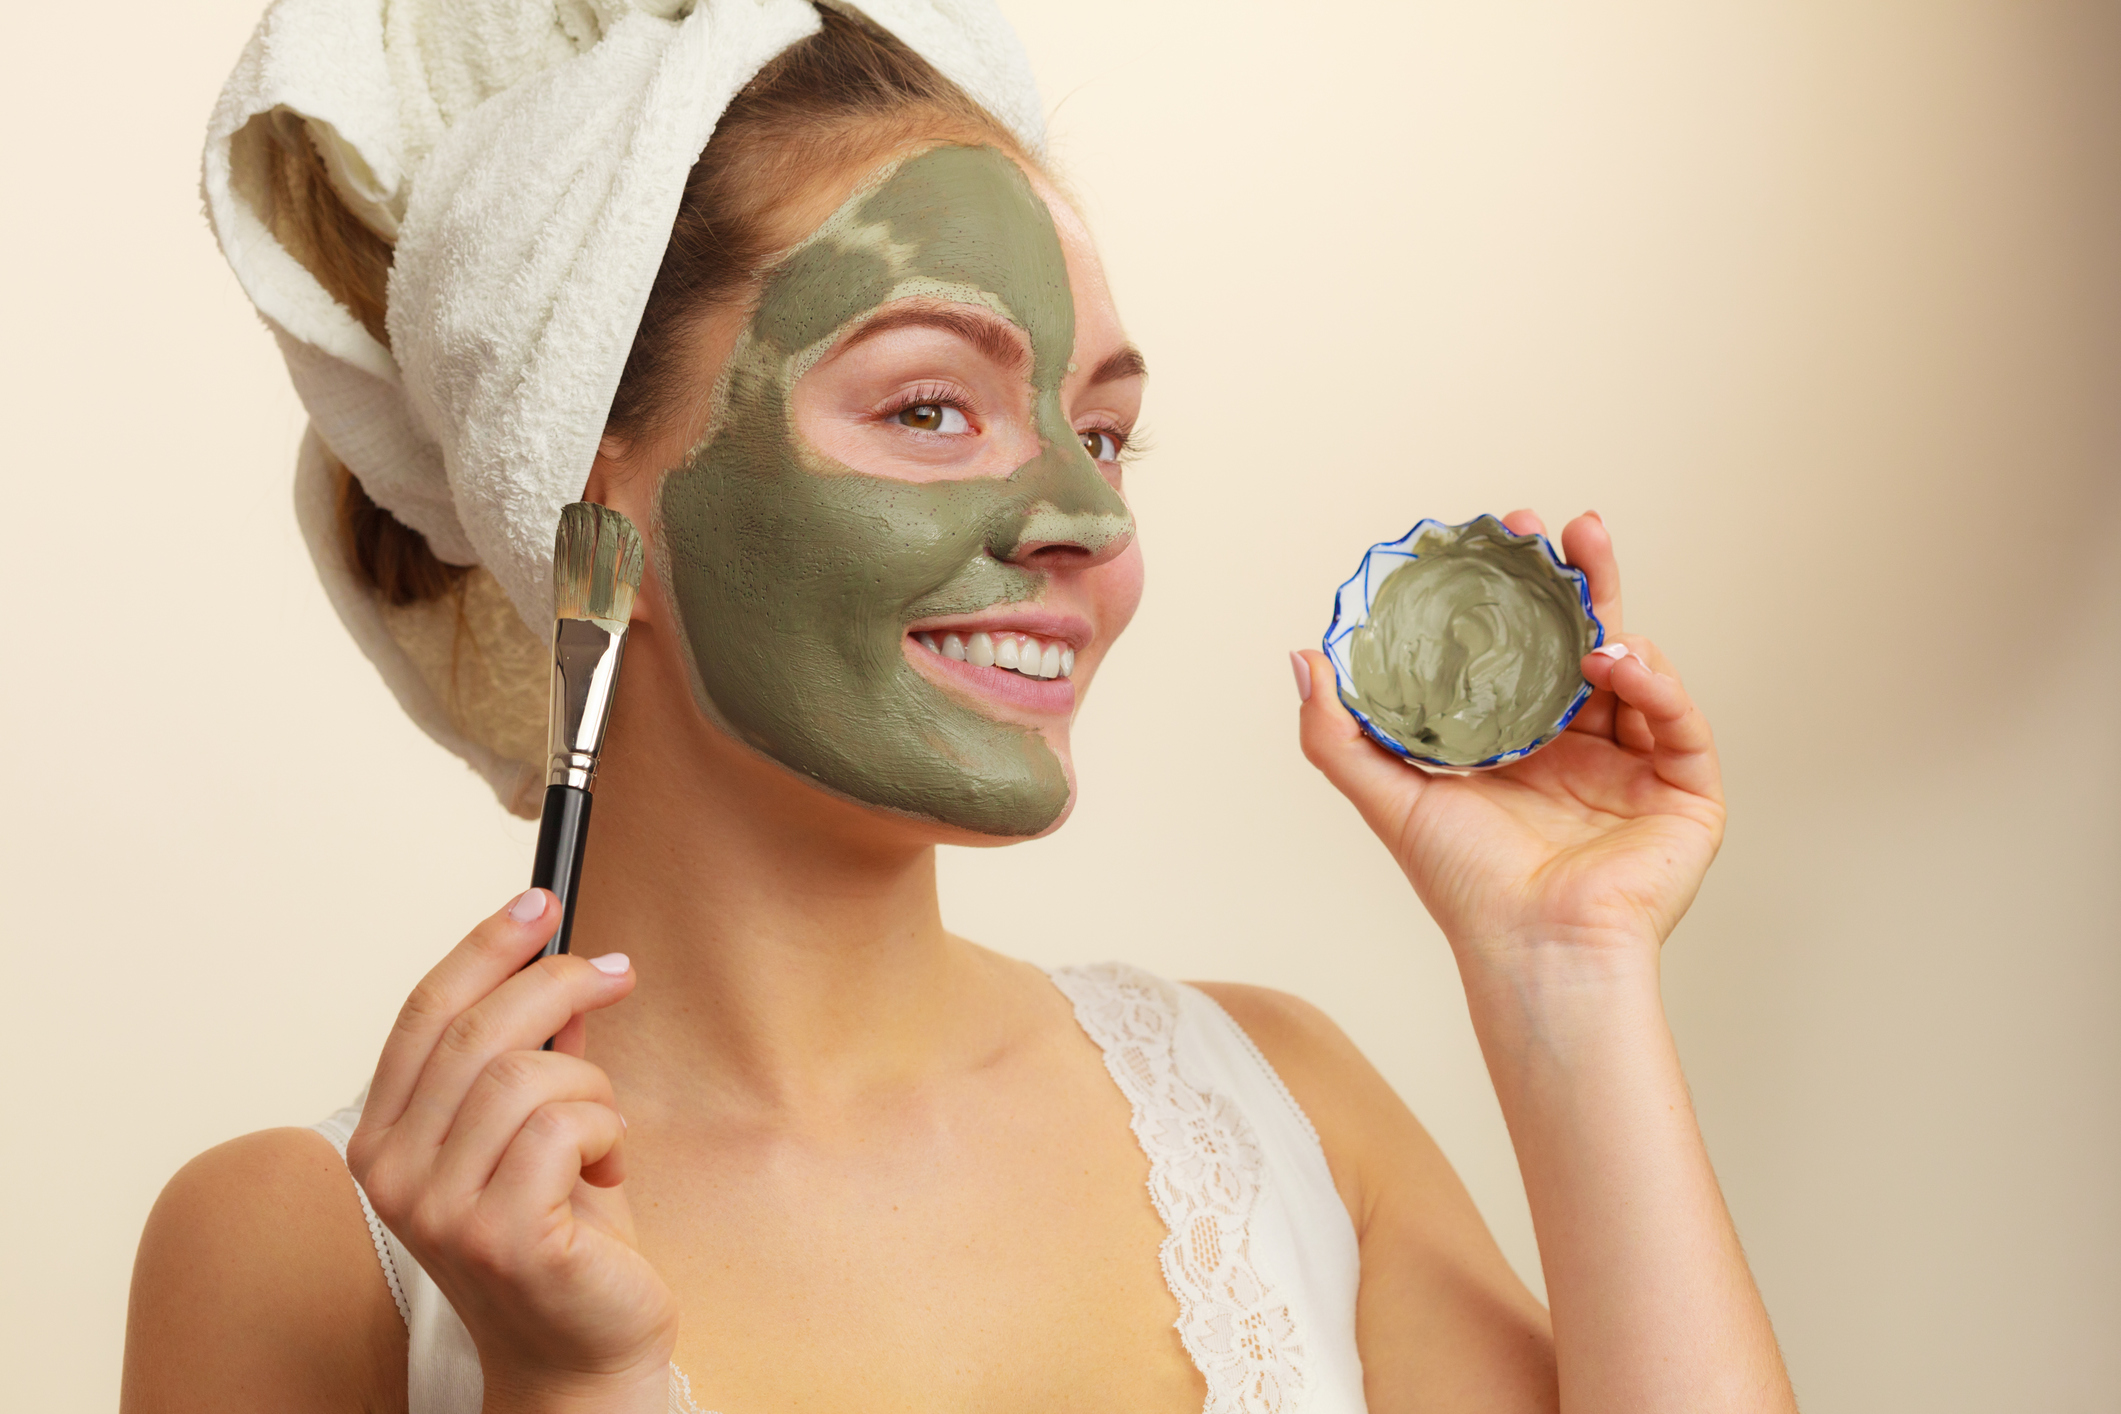 Aztec Clay Mask for Acne - News Digest | Healthy Options